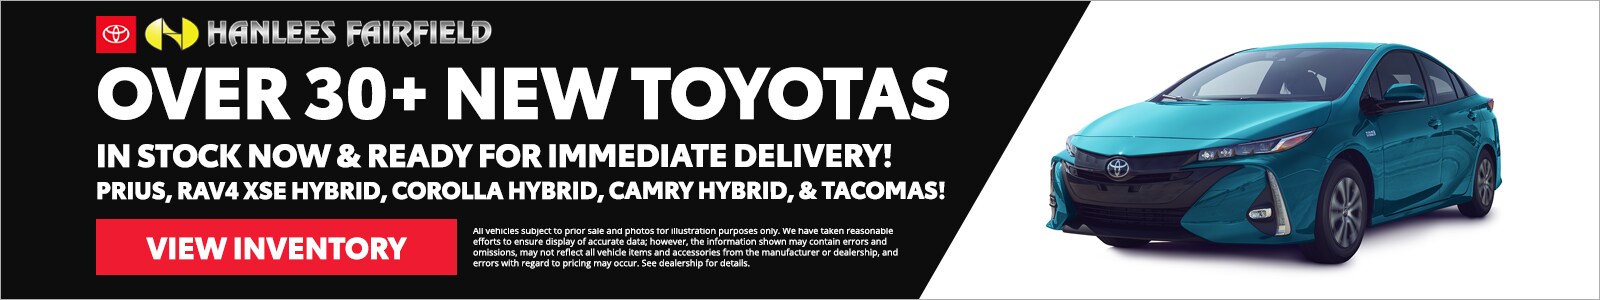 New Toyotas in stock and ready for immediate delivery promotion banner